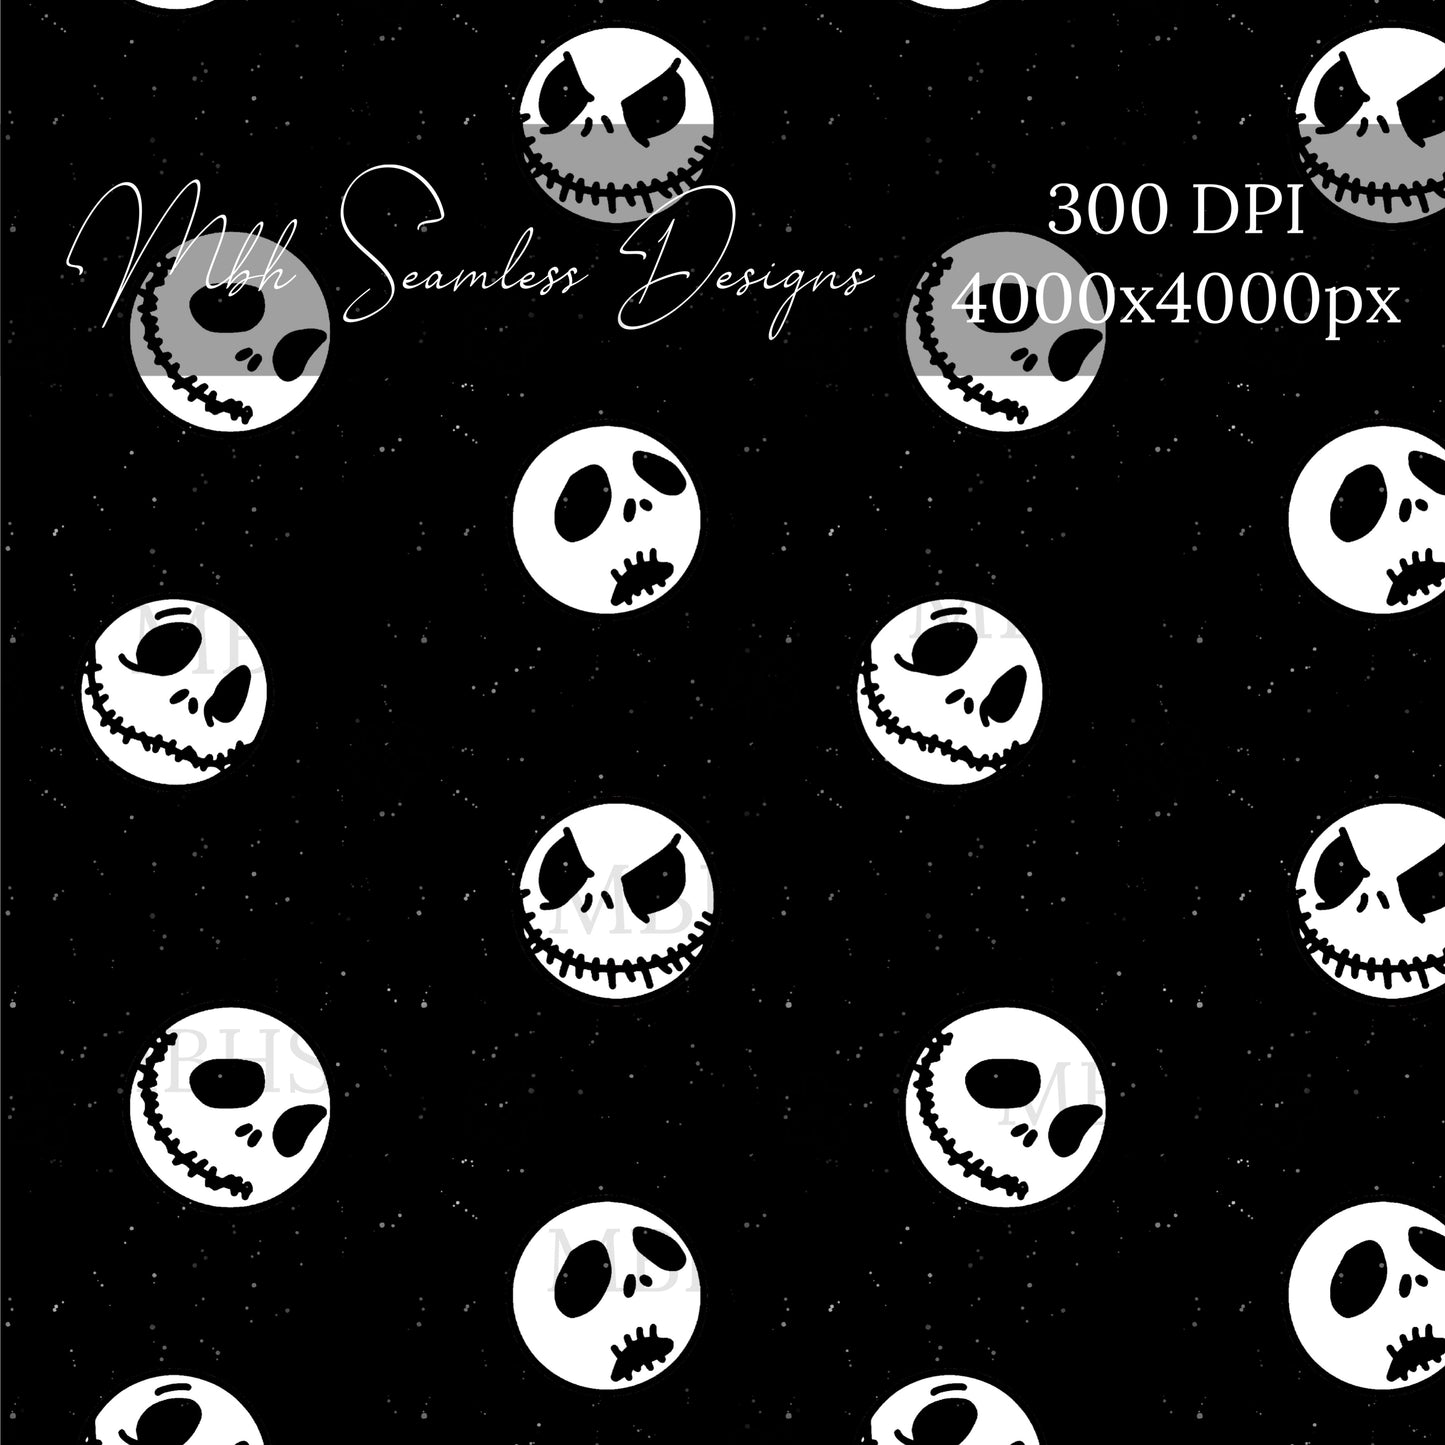 Midnight Speckled Skeleton Faces Seamless Pattern